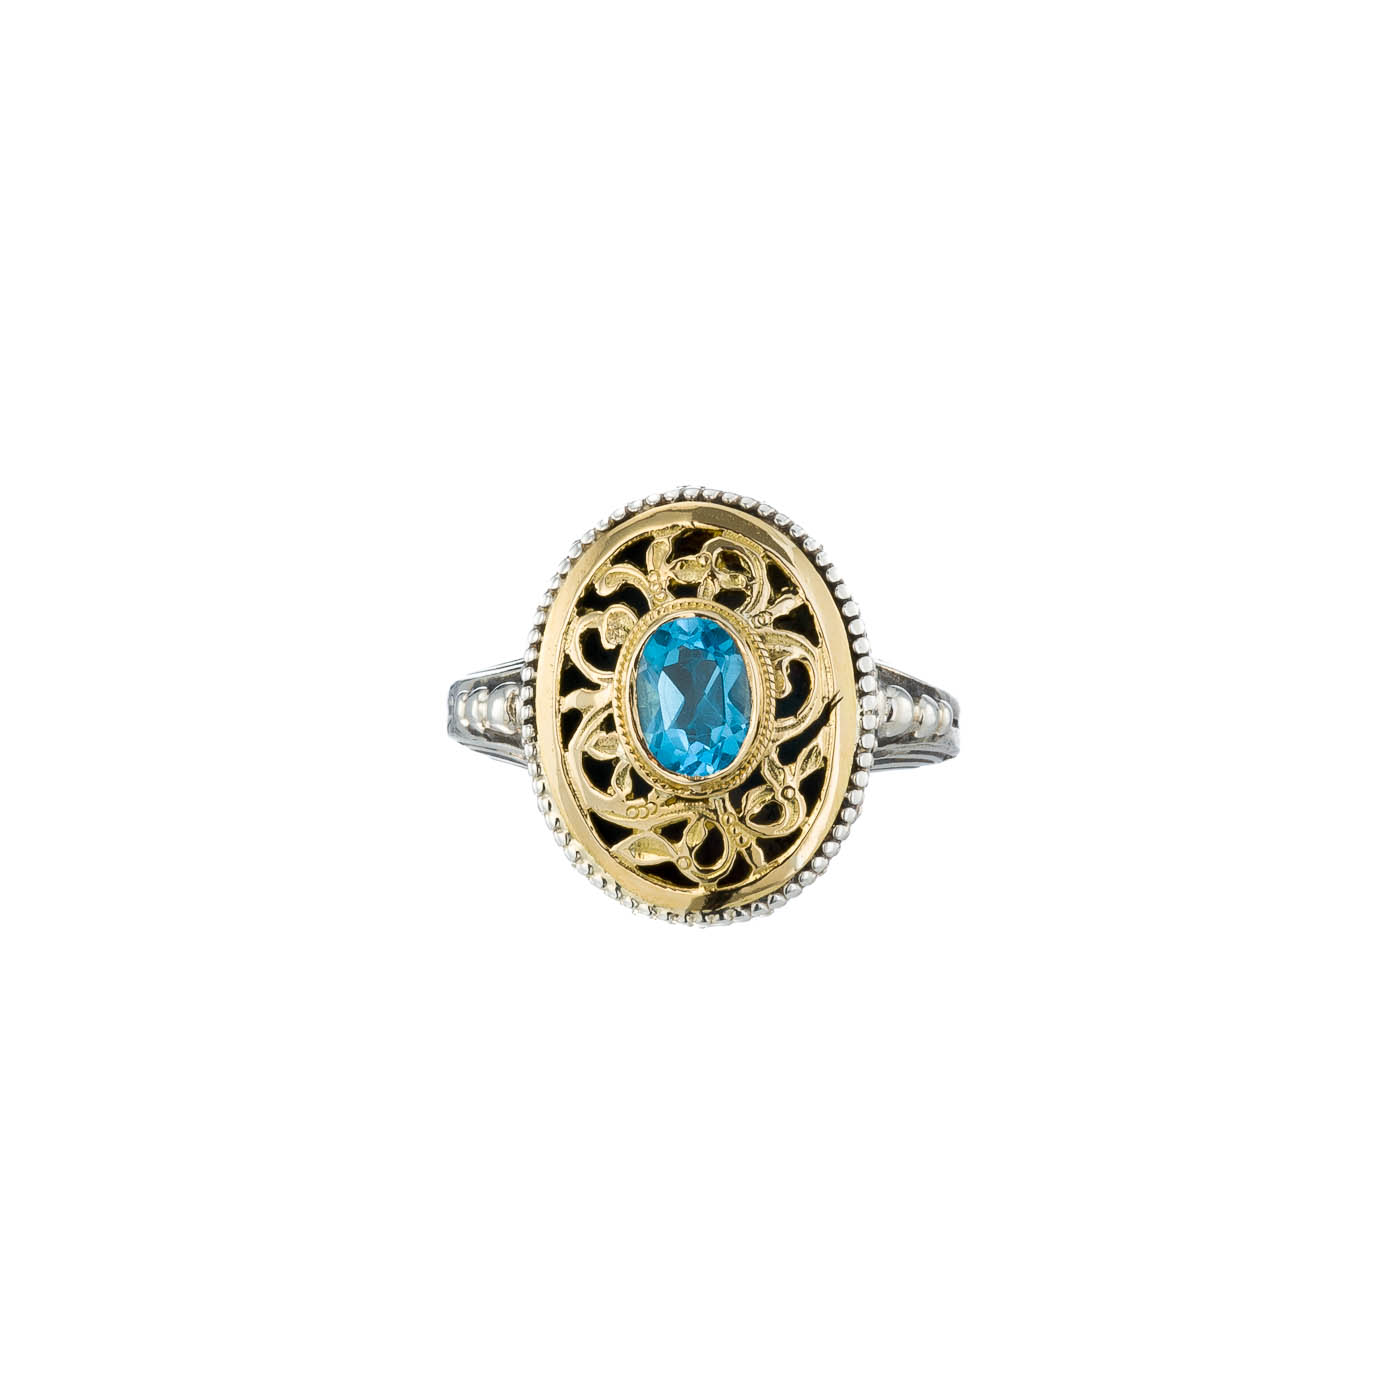 Garden Shadows oval ring in 18K Gold and Sterling Silver with blue topaz